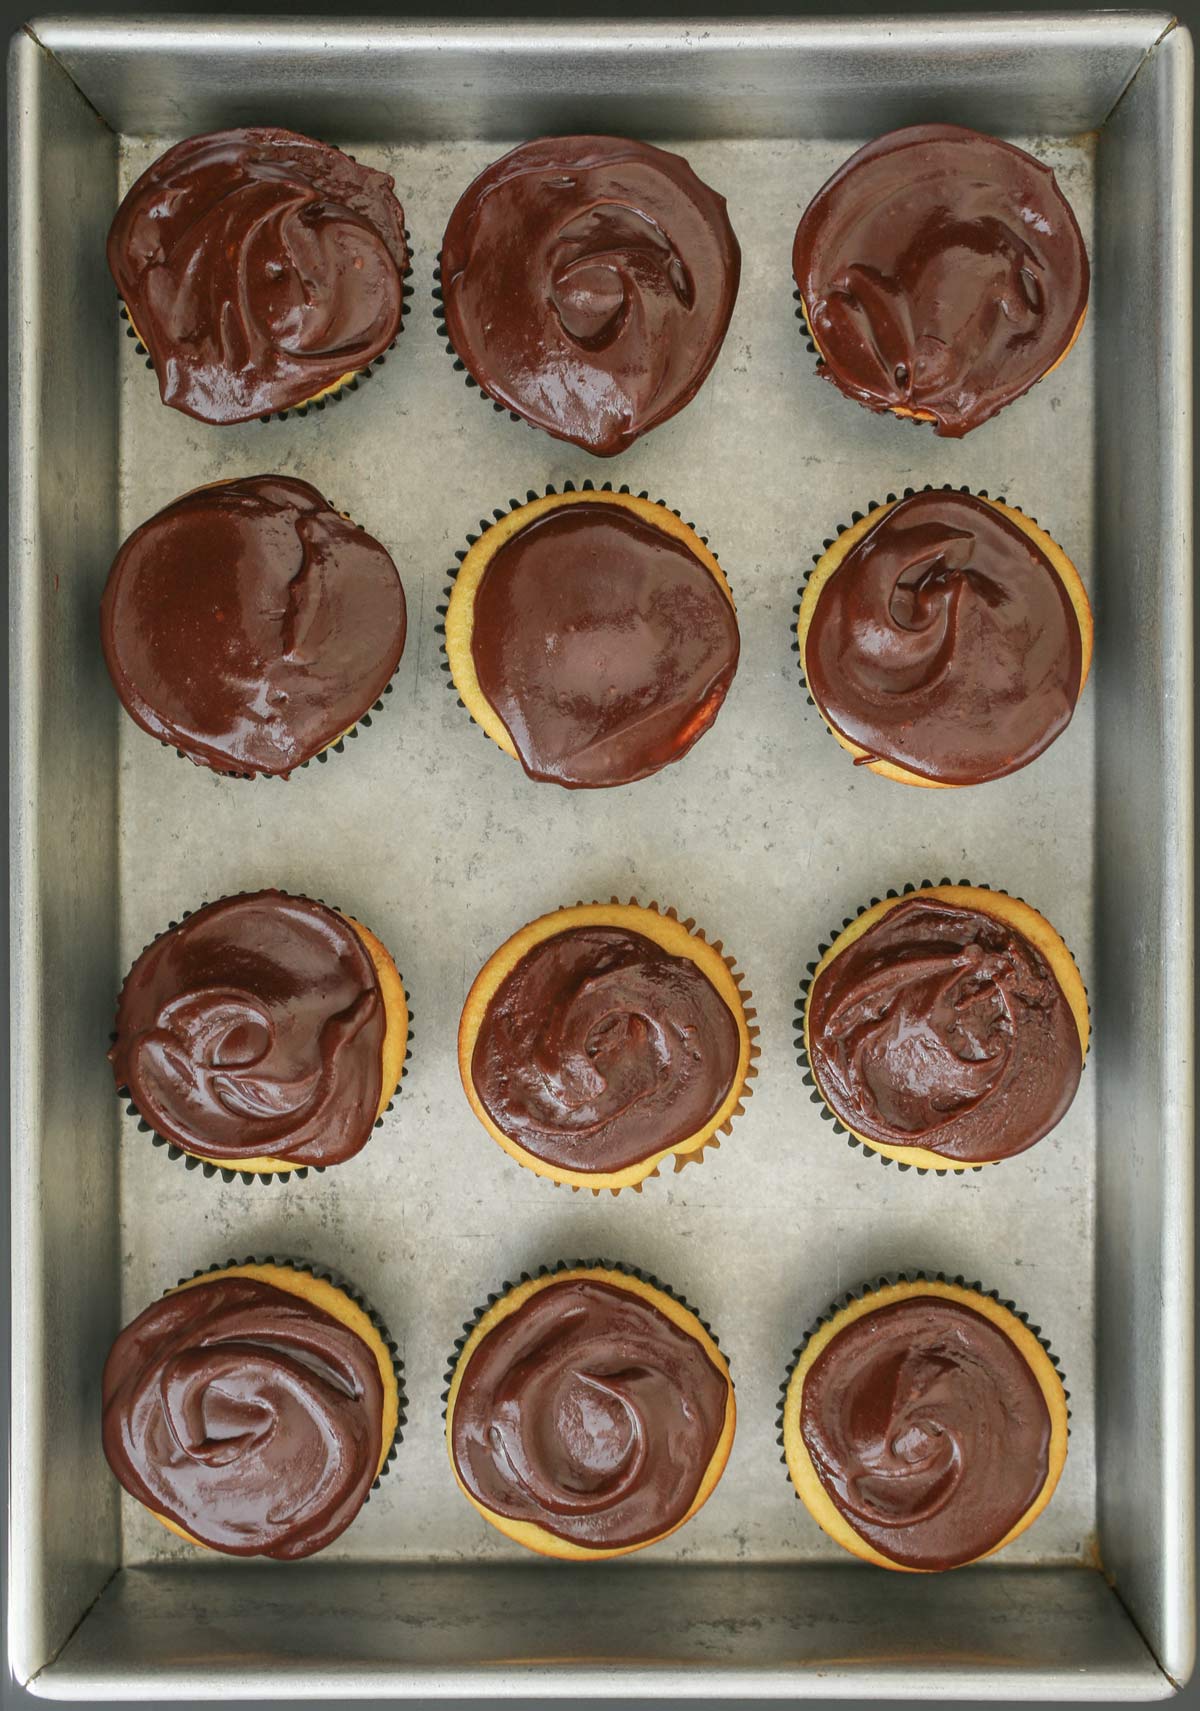 frosted chocolate cupcakes in metal tray.